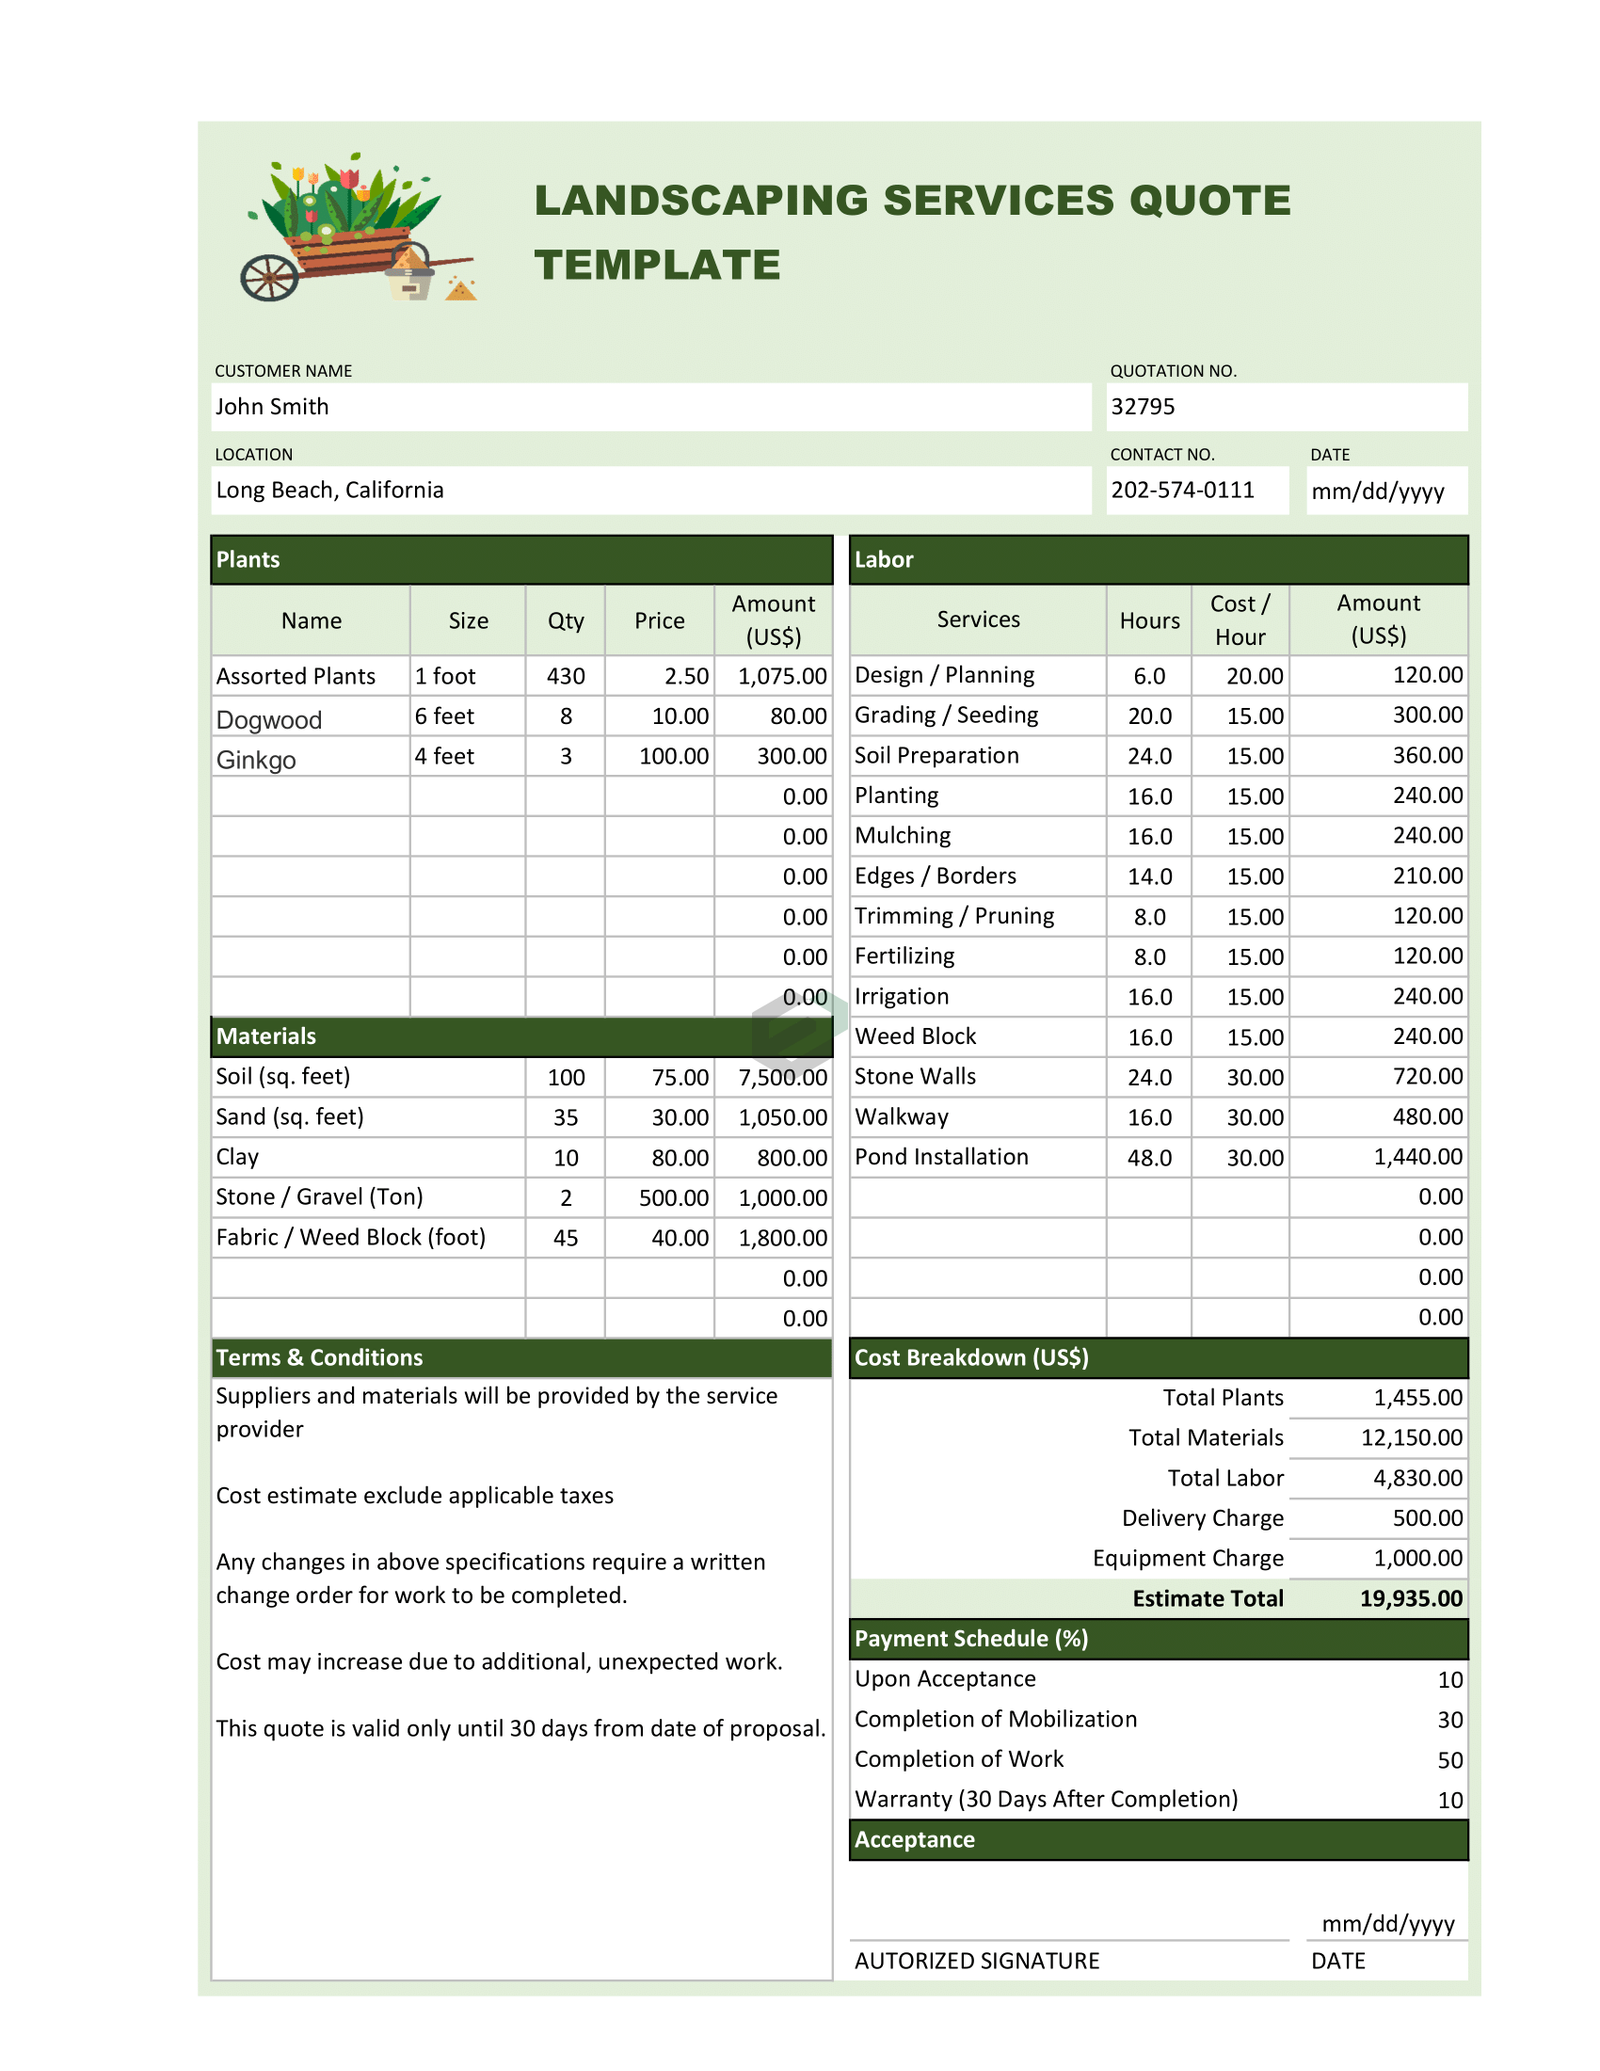 Landscaping Services Quotation Excel Template